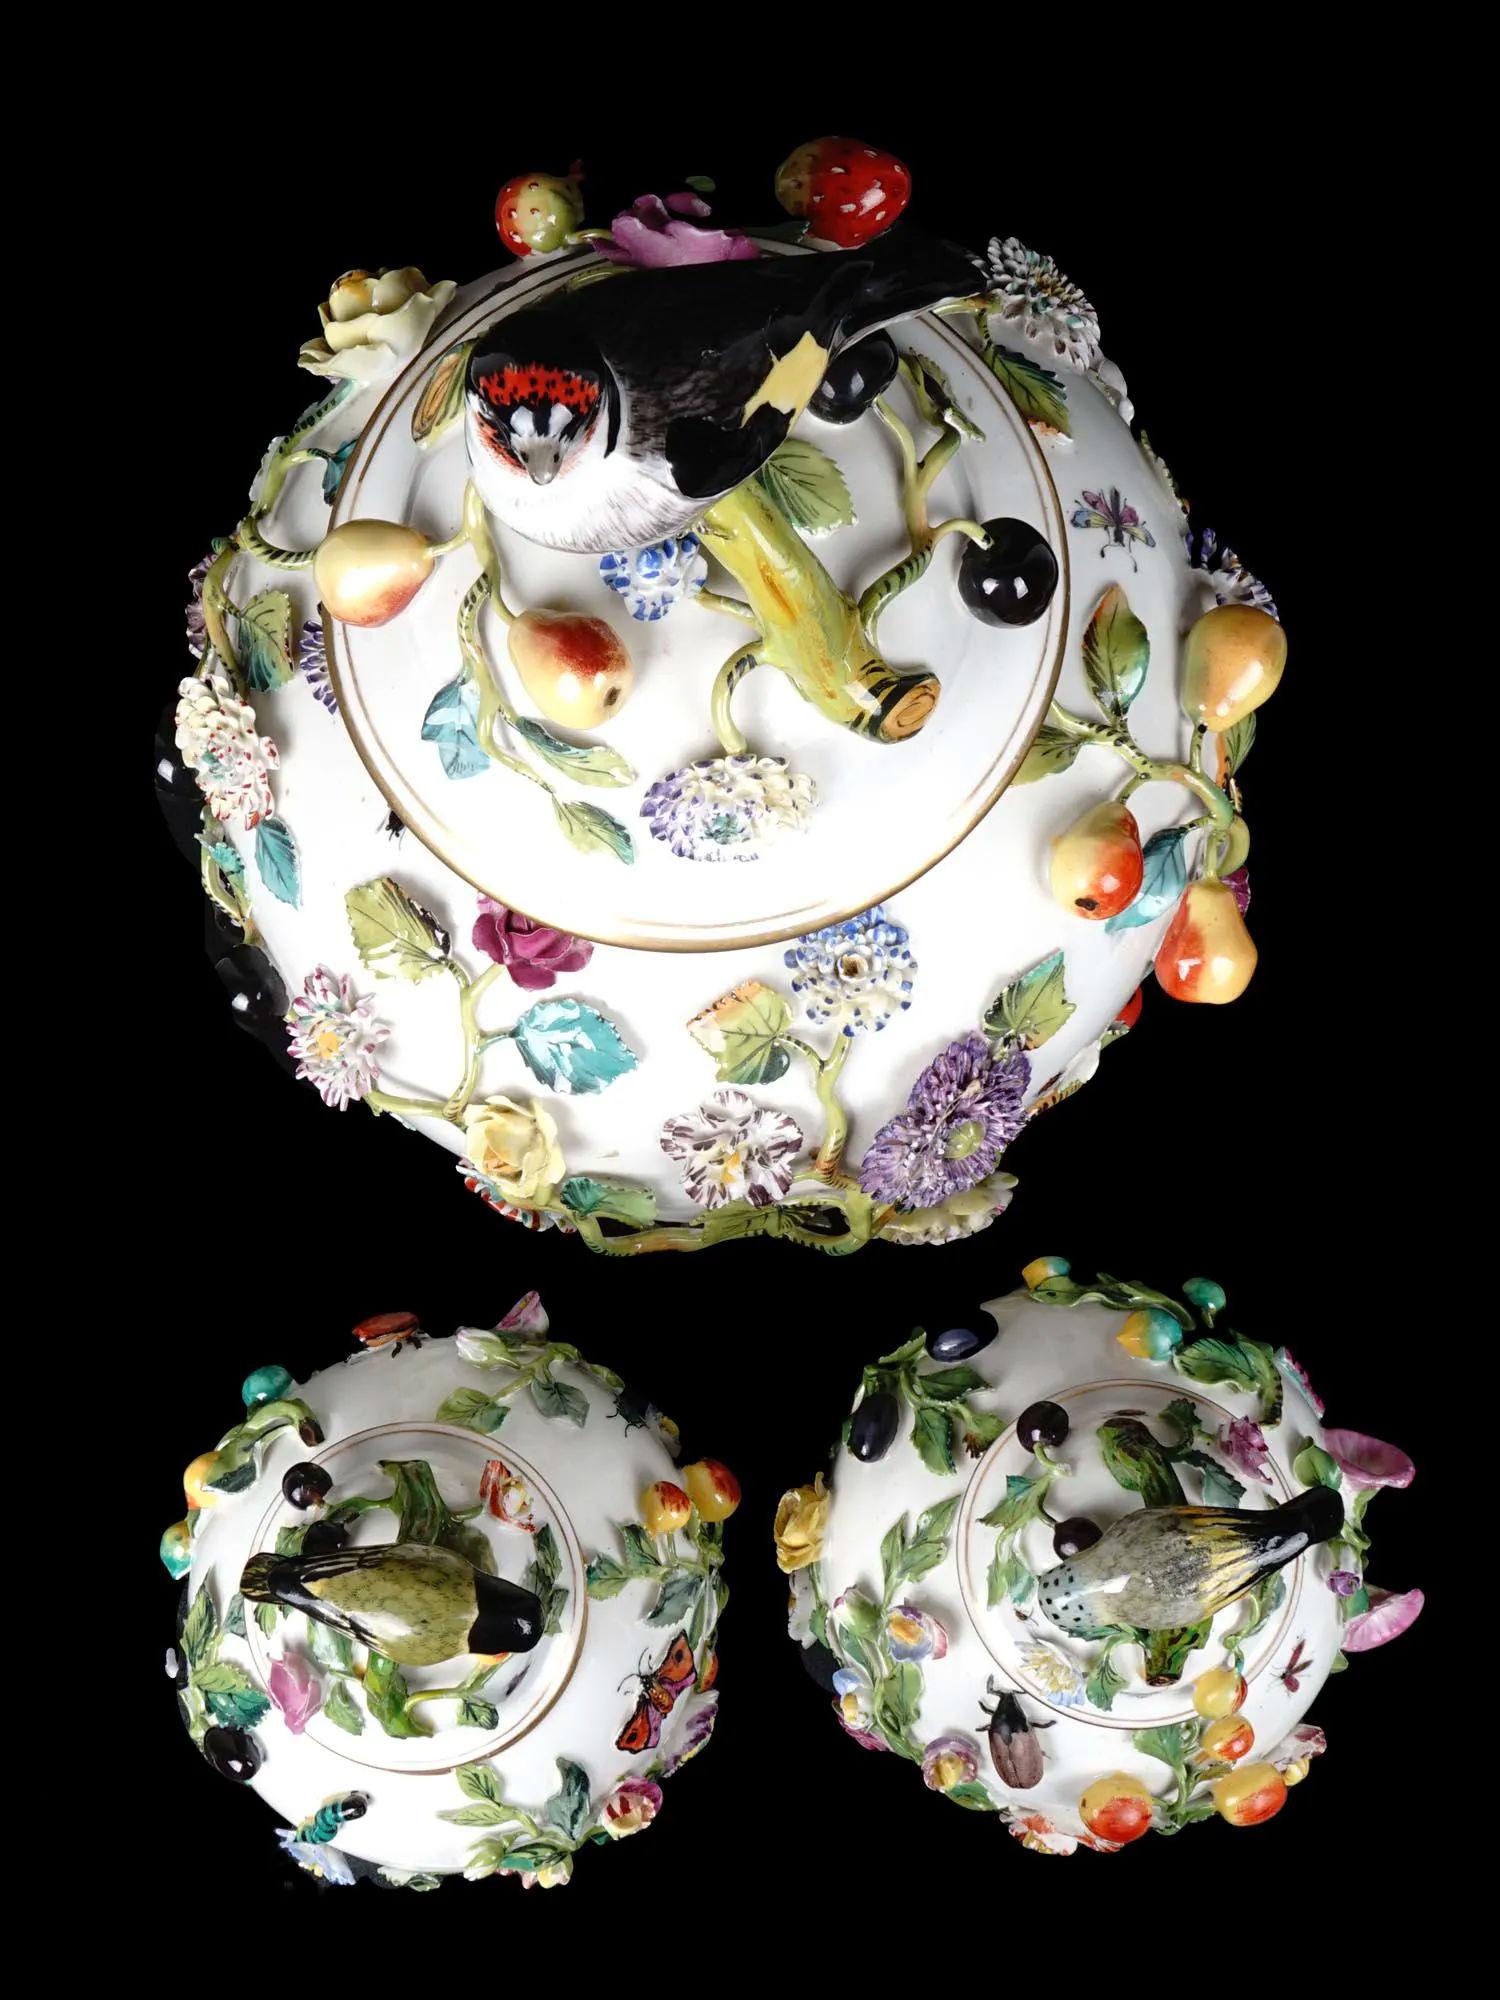 Our garniture from Carl Thieme of Potschappel, Thuringia, near Desdren, includes a large vase with cover measuring 17 inches tall and two vases with covers measuring approximately 11 1/2 inches. Each encrusted with fruit vines and flower heads and